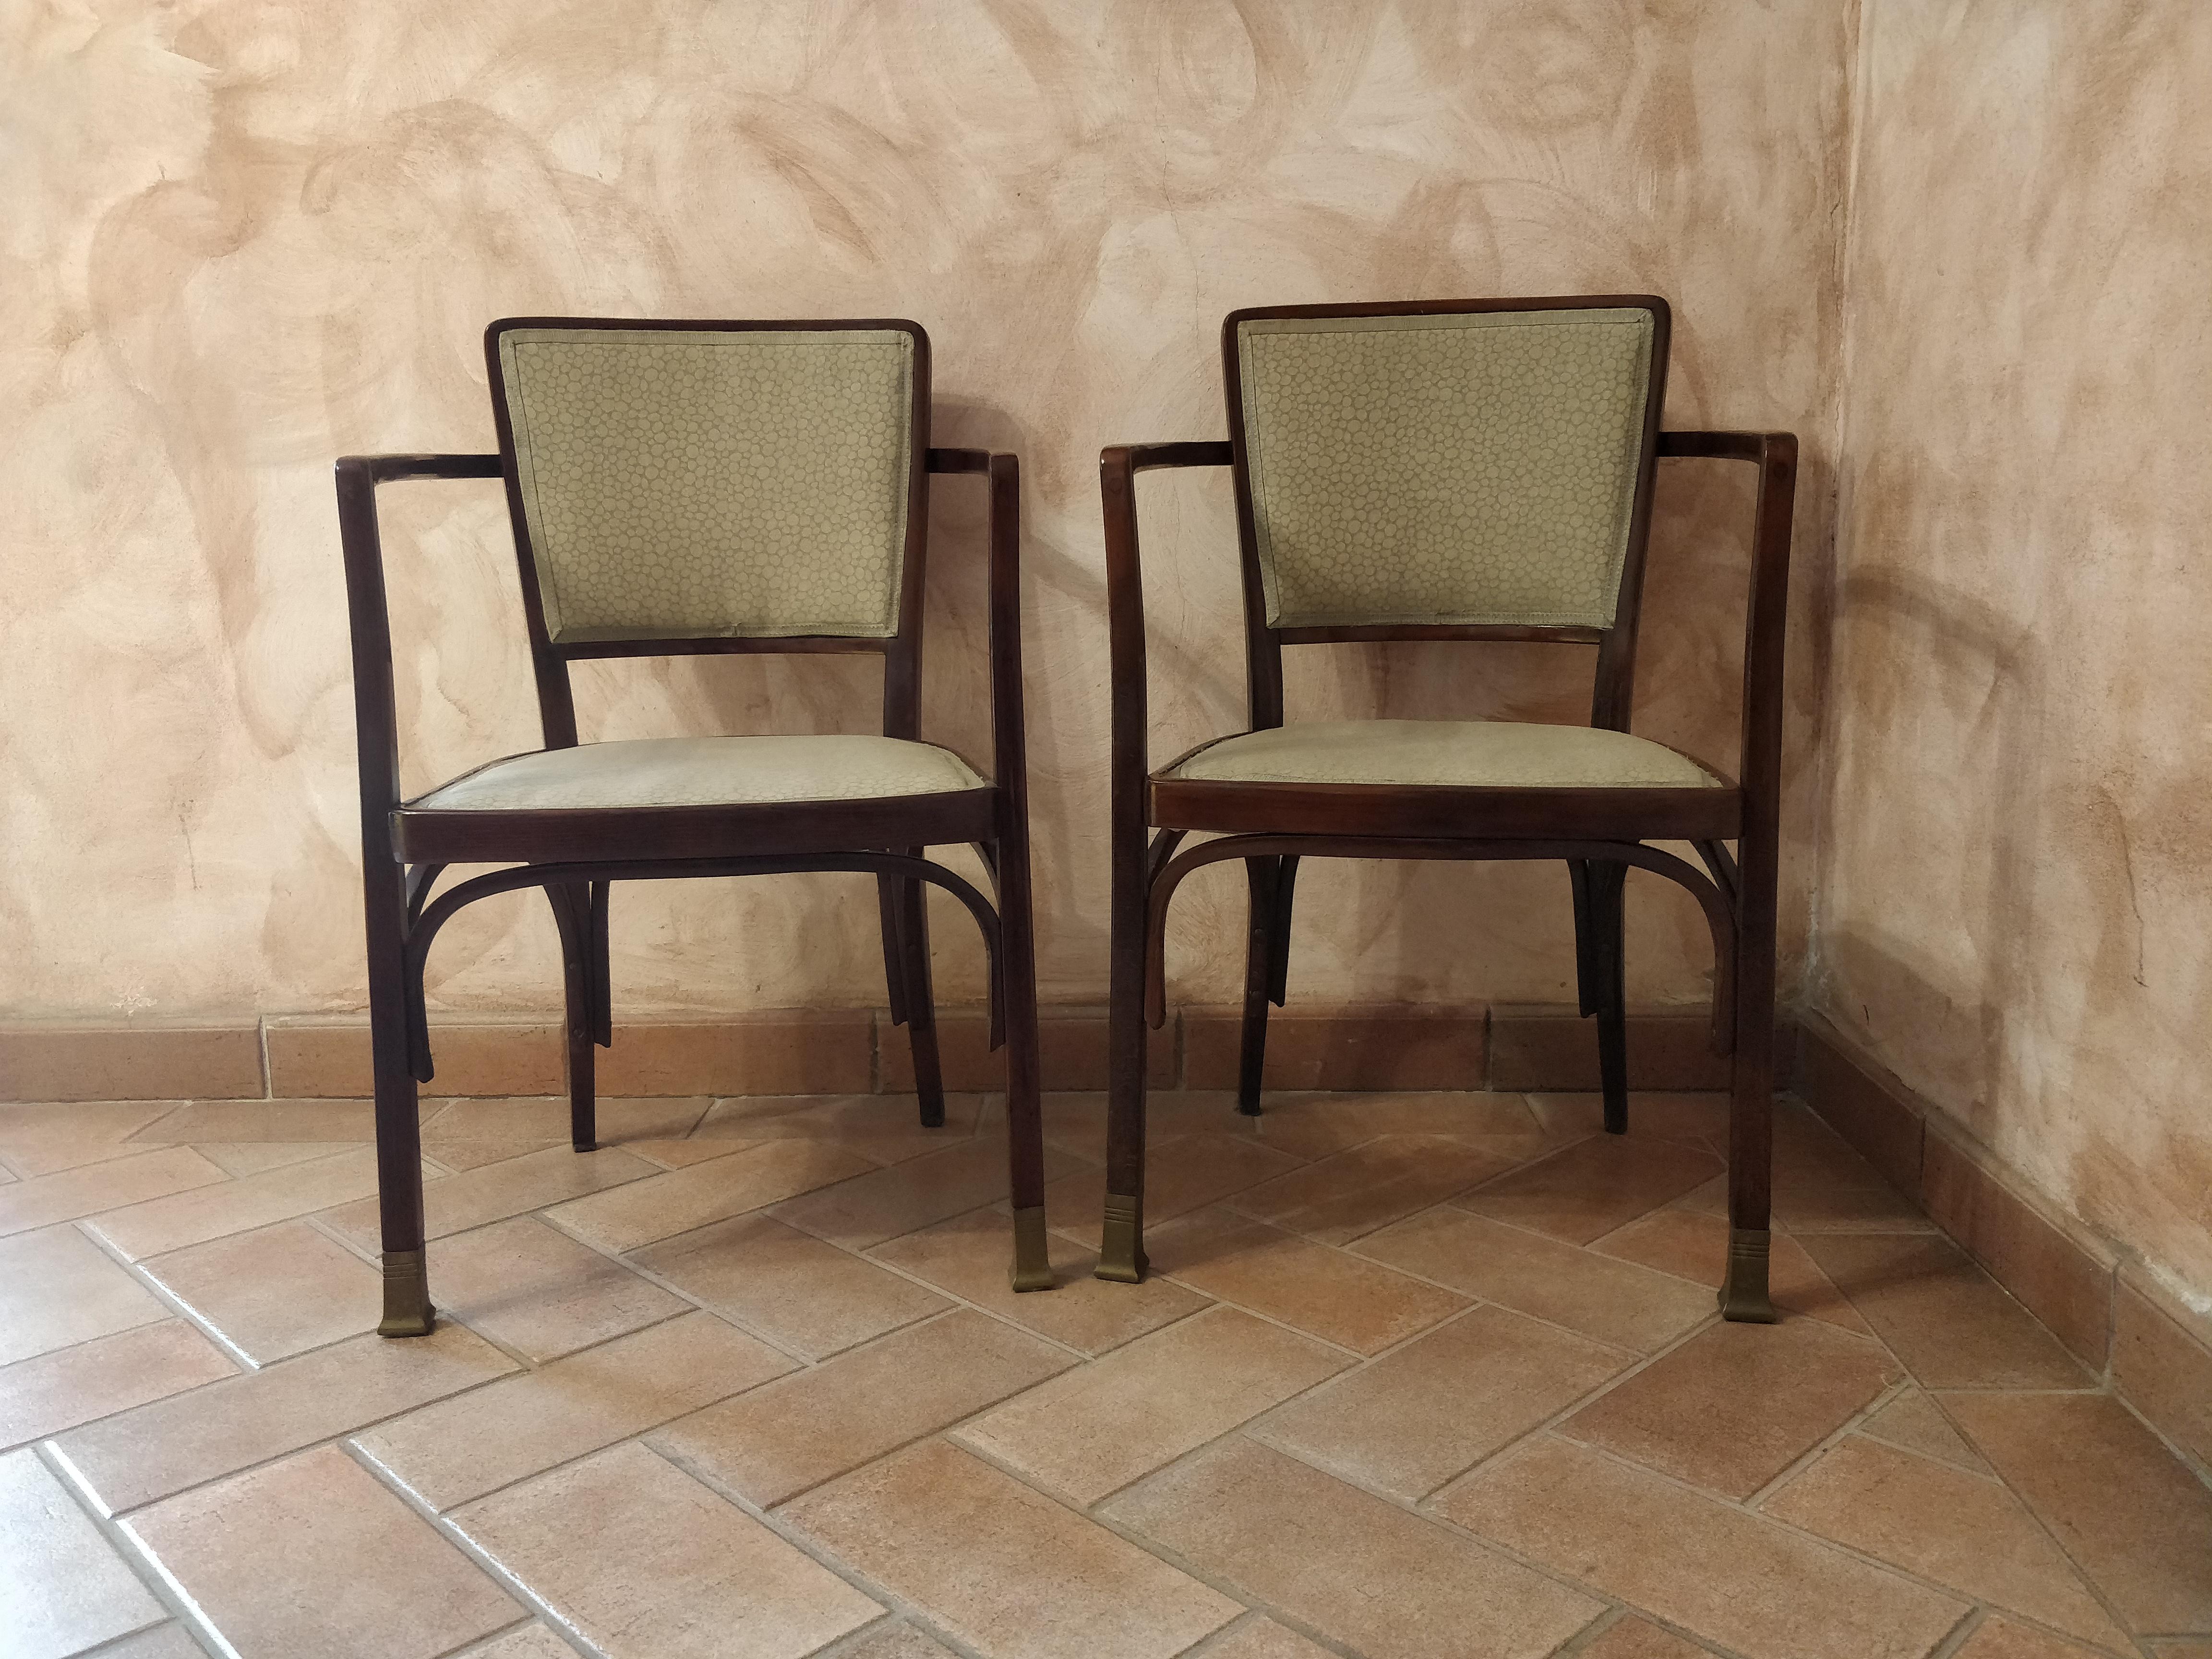  A pair of armchairs 1902s mod. 719 with expertise  from BEL ETAGE gallery Wien.
Made  from J & J Kohn.
Materials: beech and brass.
This armchair  have been designed around 1901 from koloman Moser (Wien 1868-1918)
 one of the most important